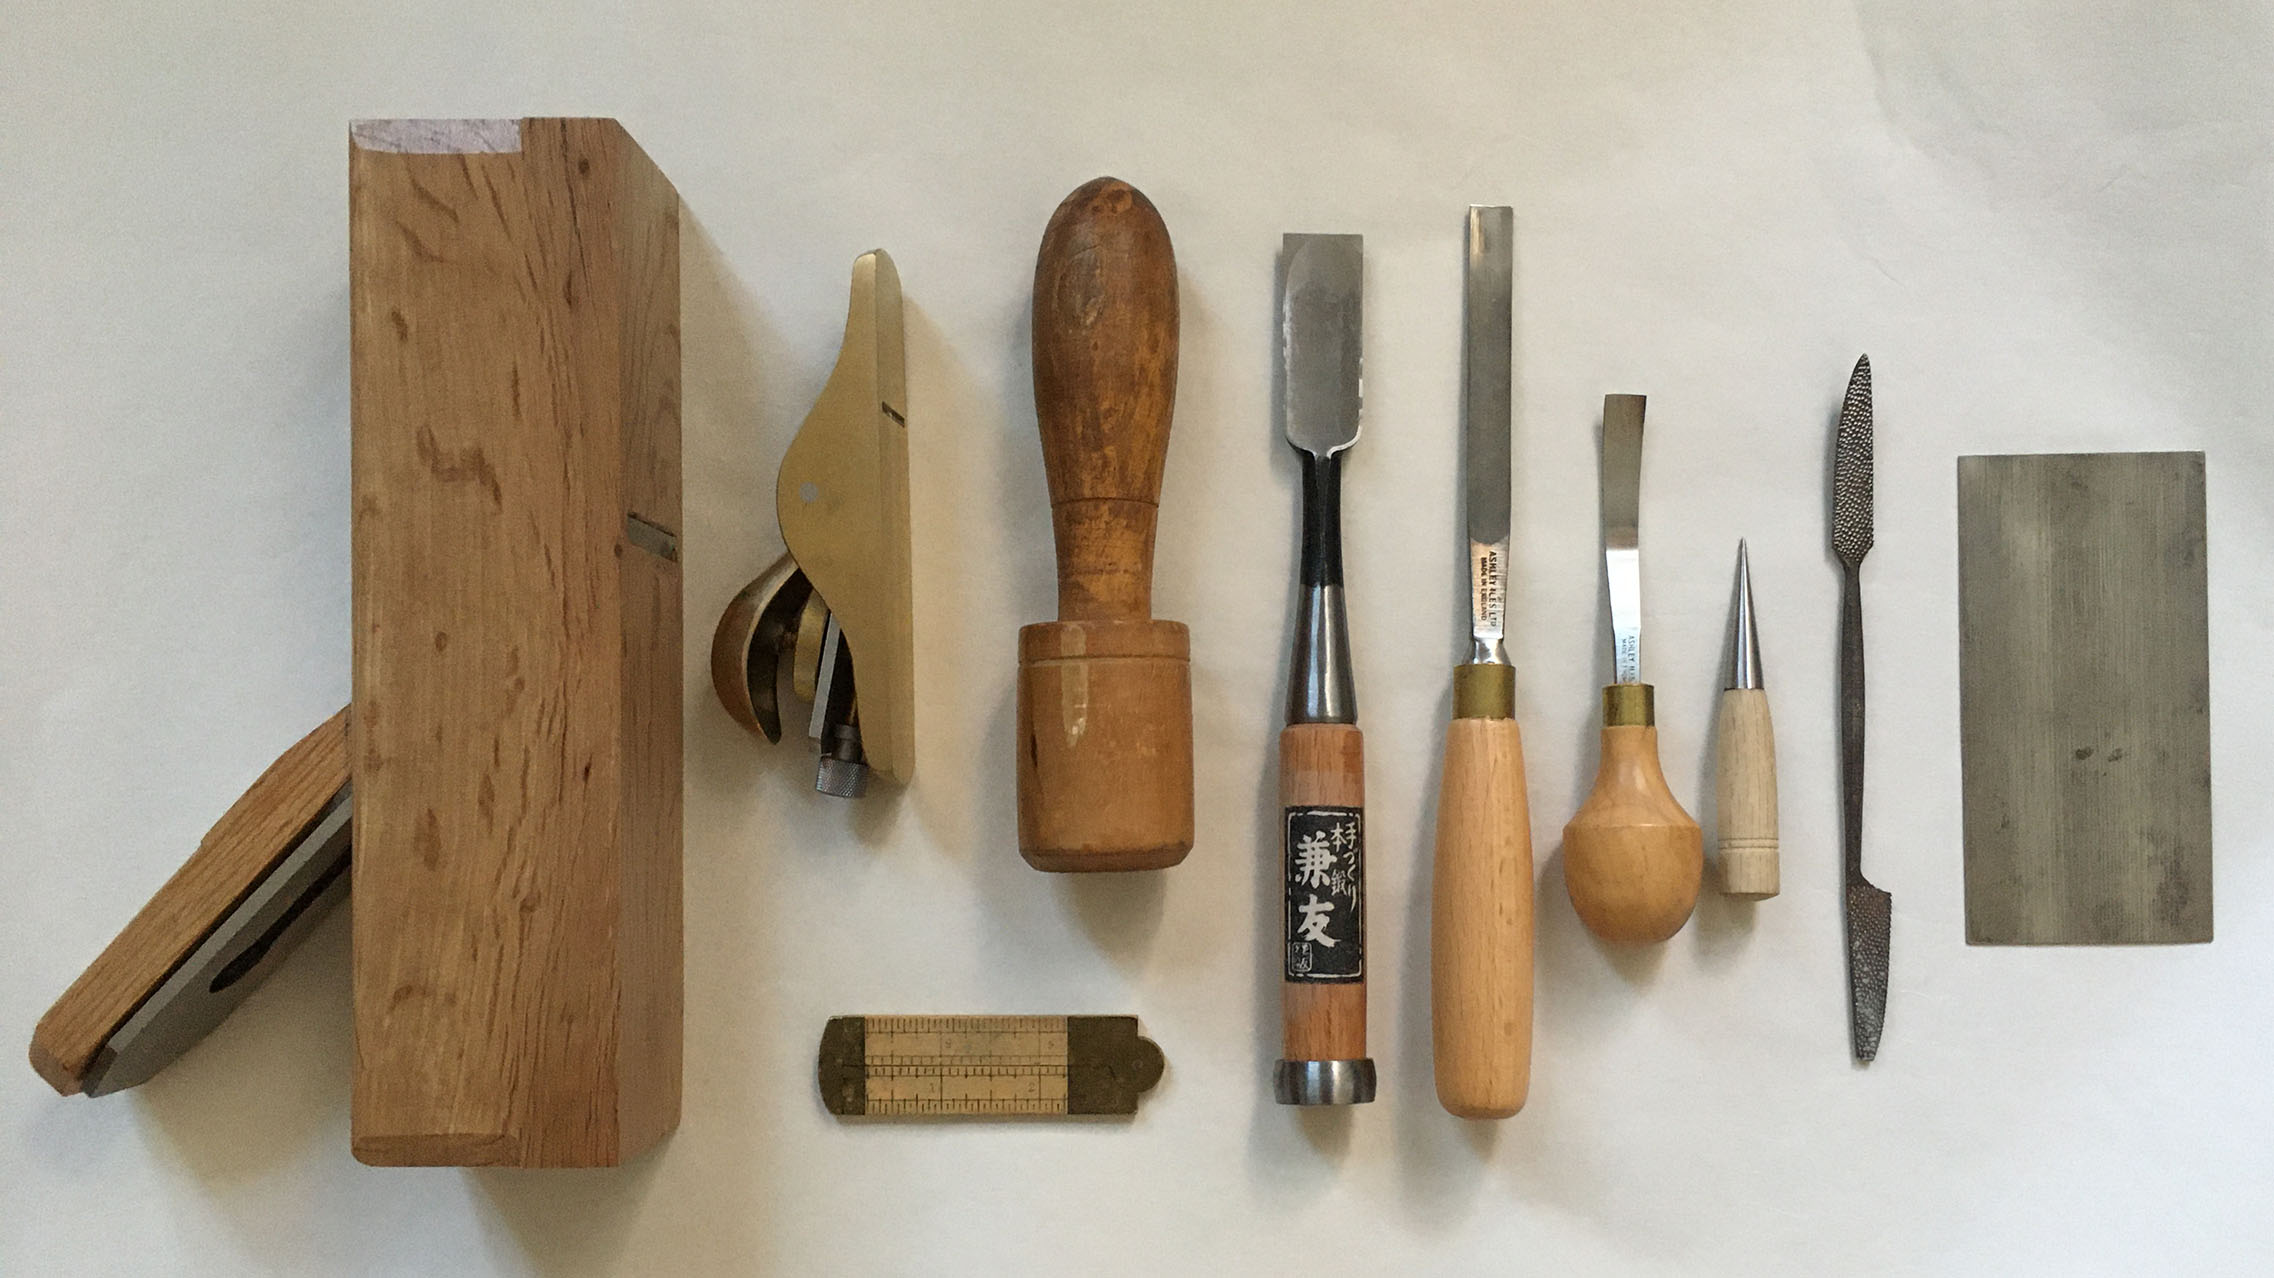 Tools used to shape wood (left to right): block plane, sole plane, ruler, mallet, flat chisel, straight gouge, curved gouge, awl, rasp, and cabinet scraper